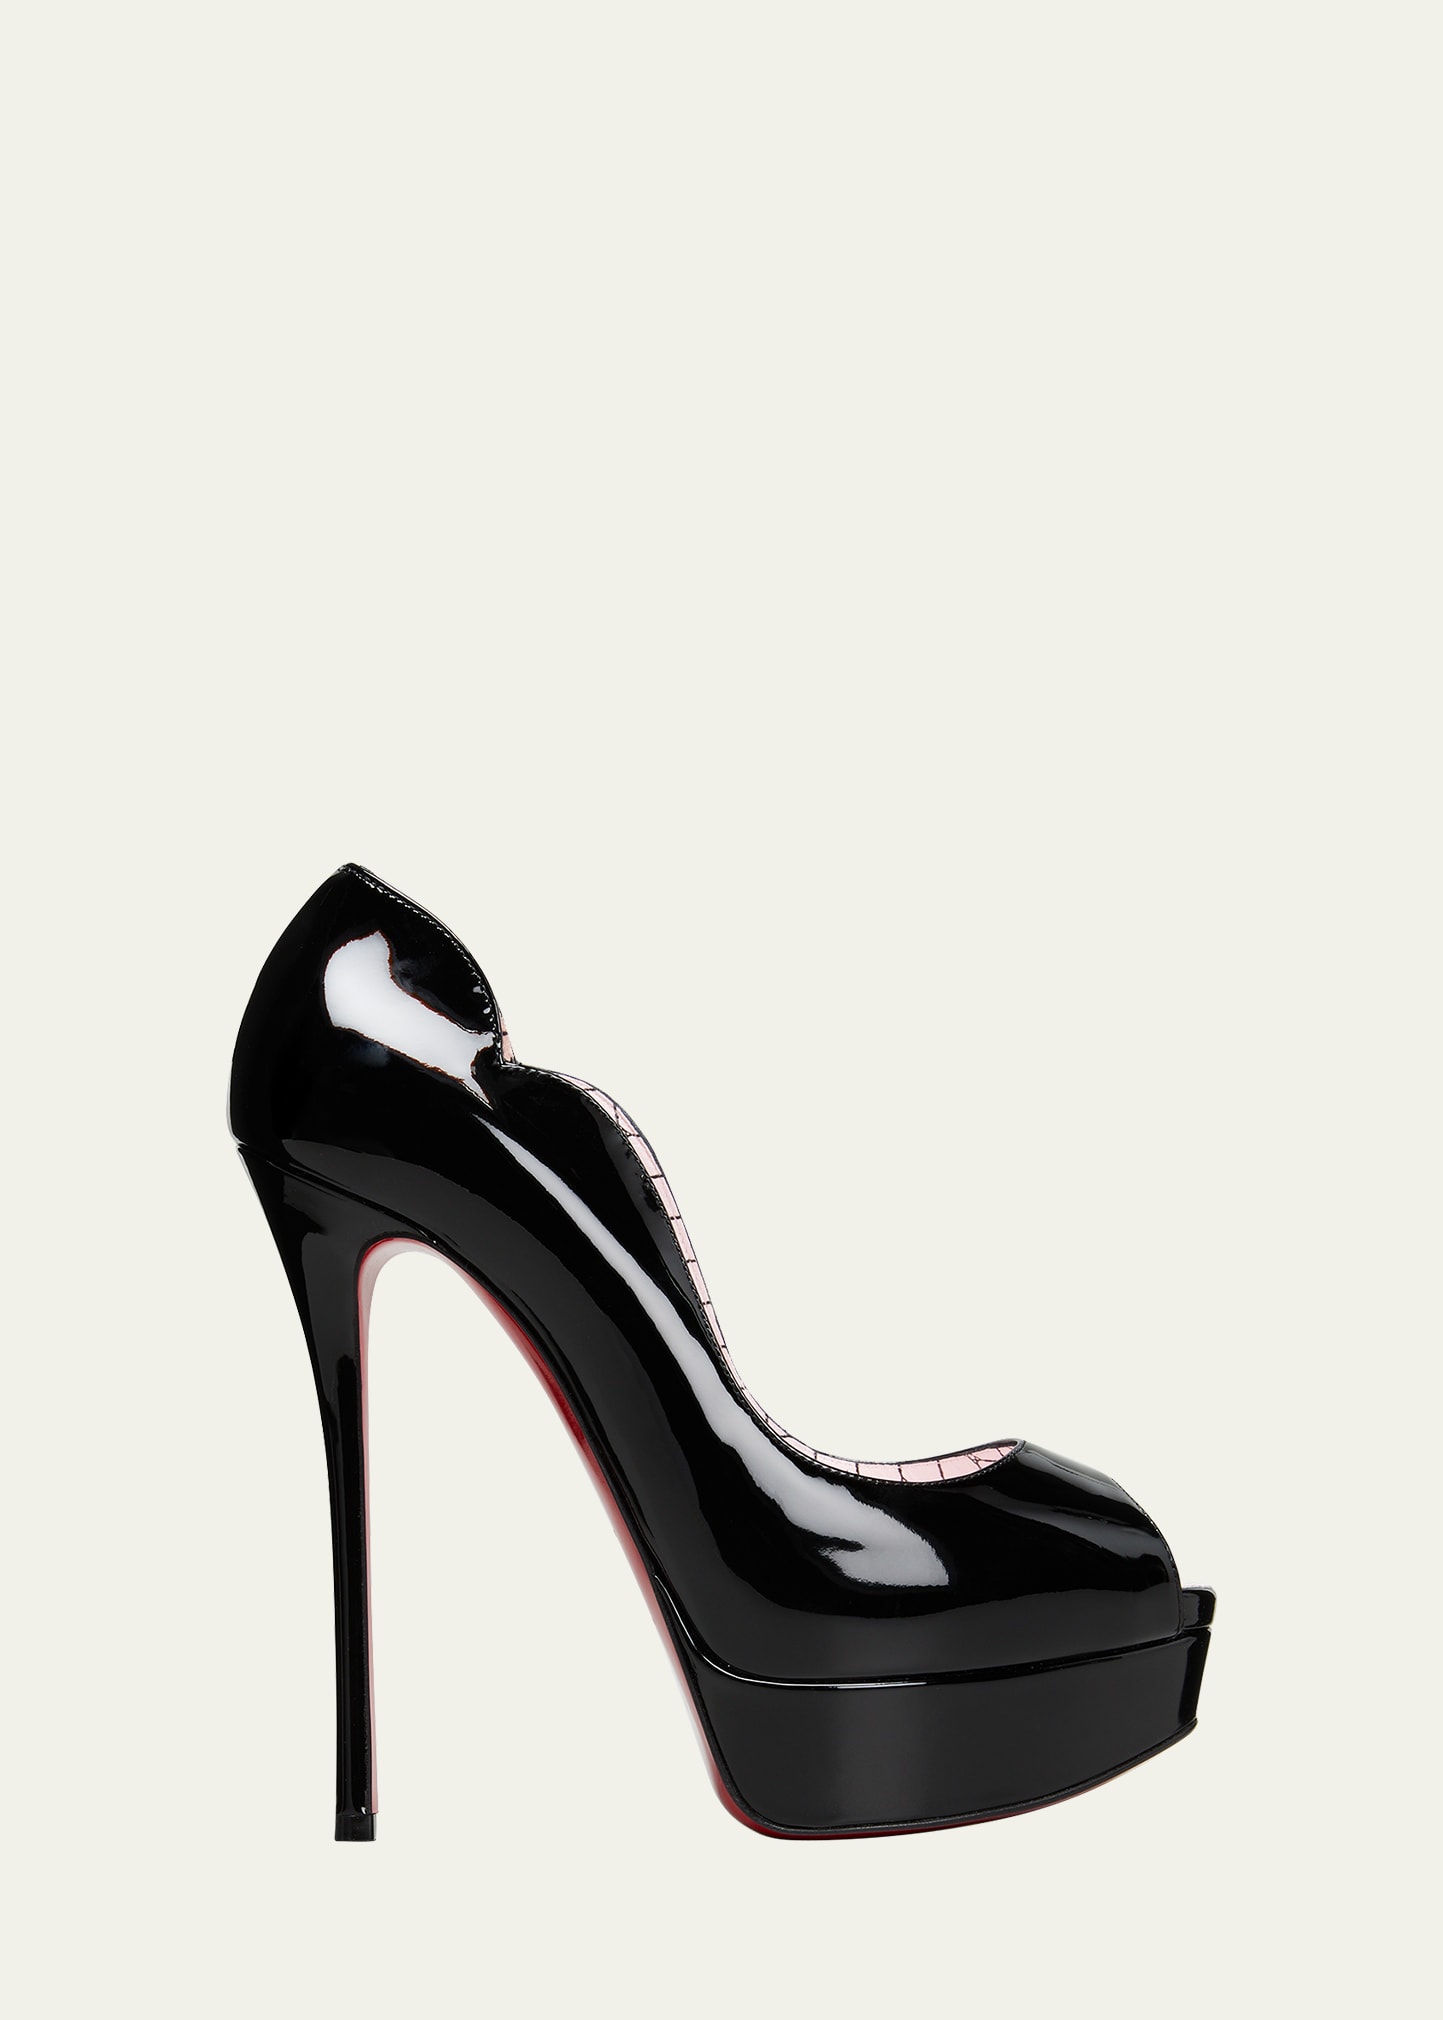 Christian Louboutin Chick Up Alta Patent Red Sole Pumps